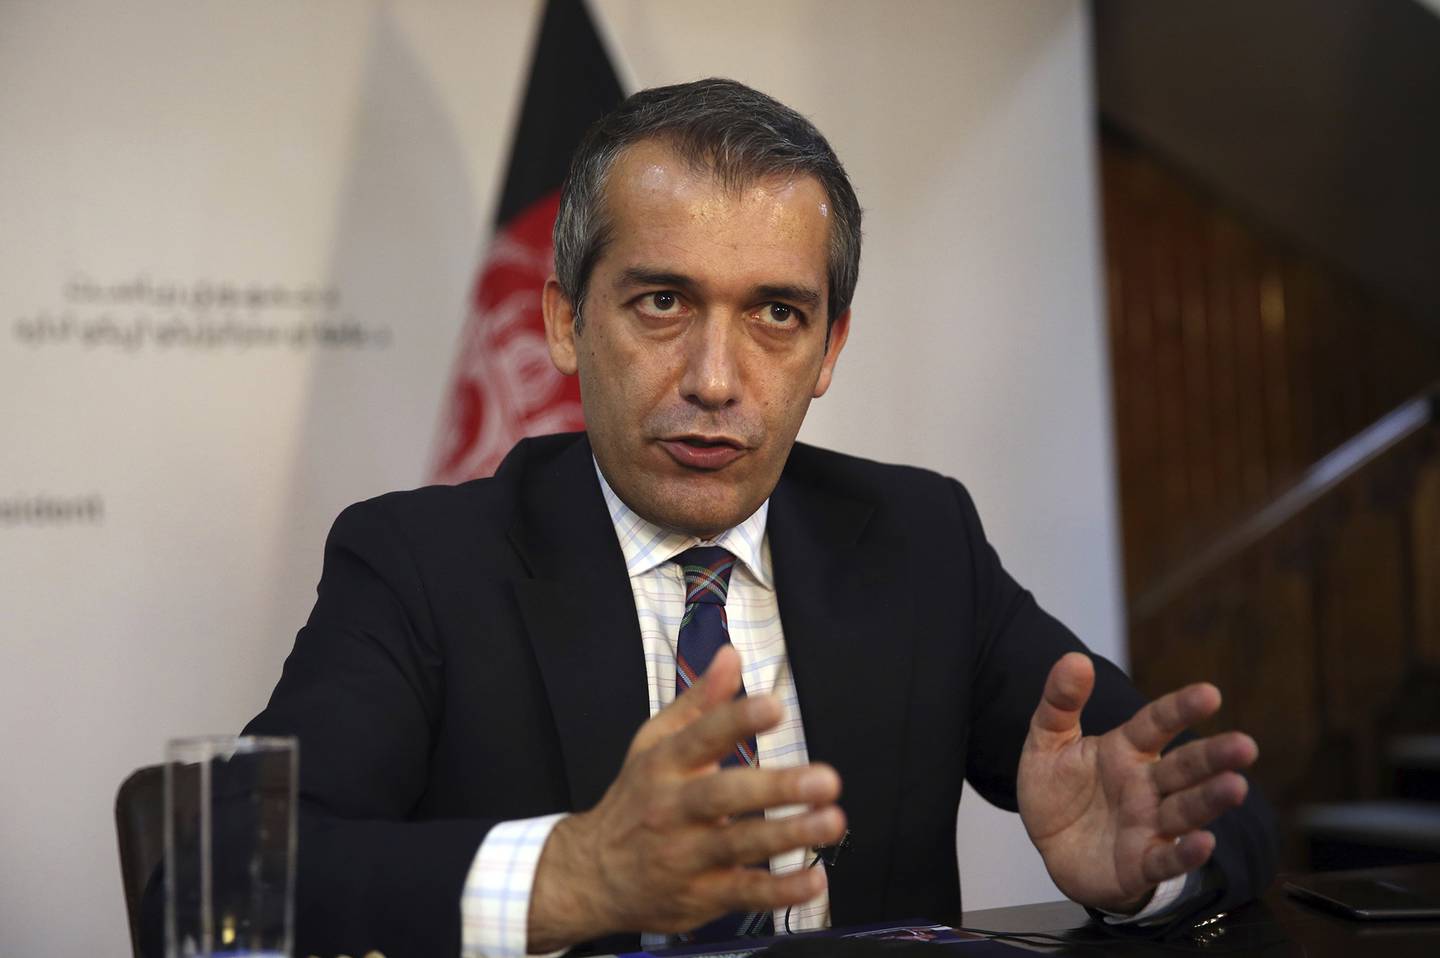 Afghan presidential spokesman Sediq Seddiqi gives an interview to The Associated Press in Kabul, Afghanistan, Monday, Aug. 17, 2020.